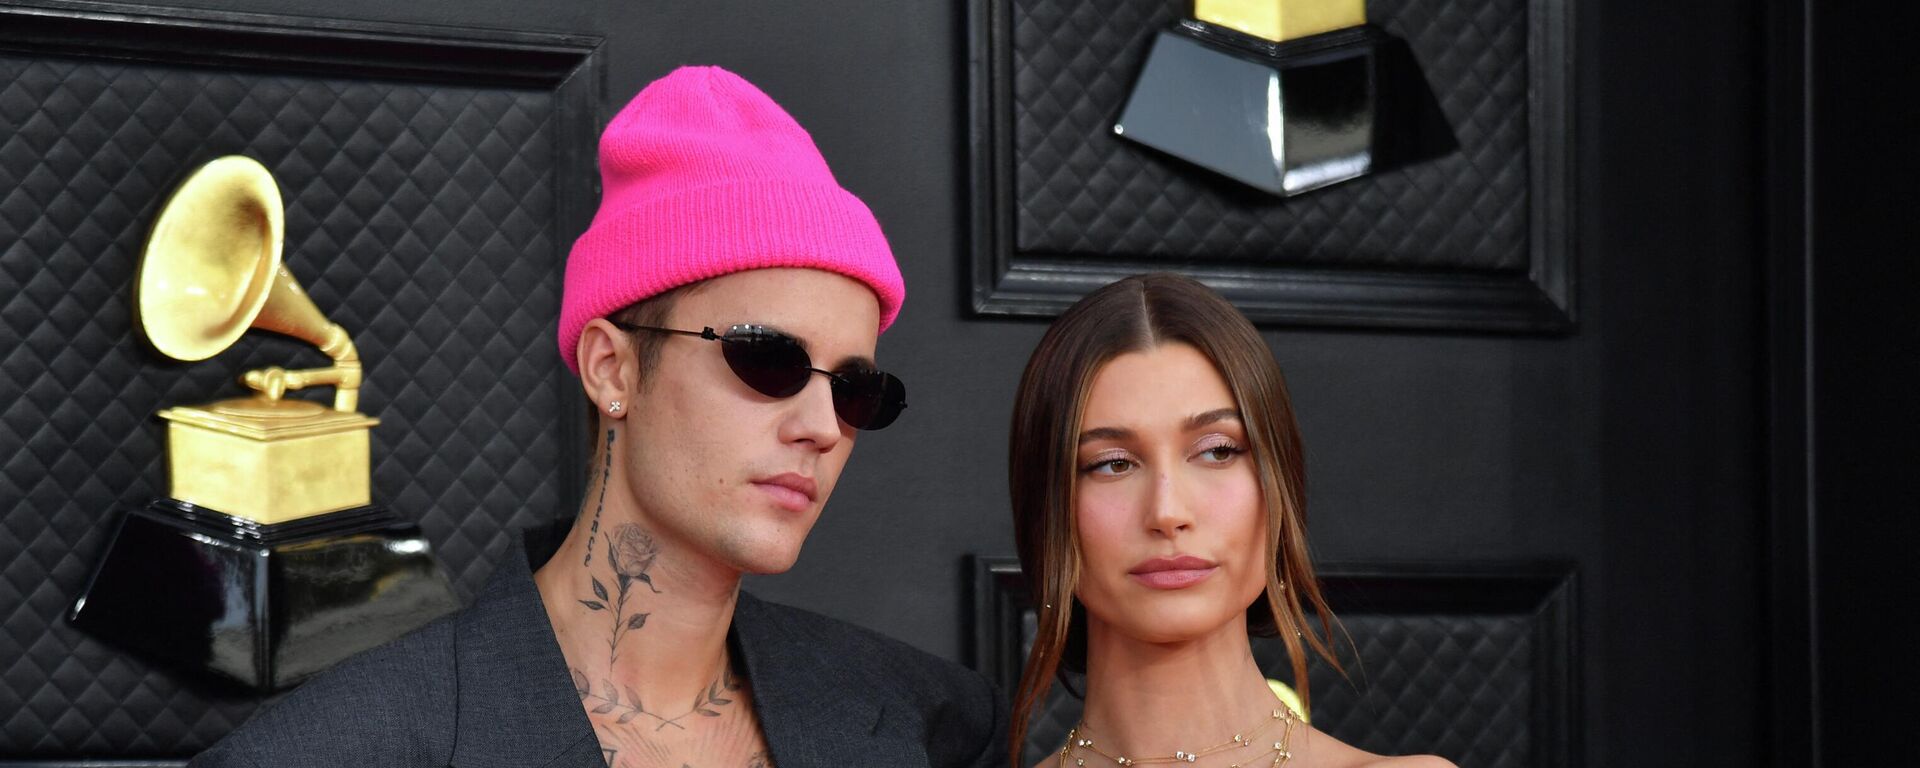 Canadian singer-songwriter Justin Bieber (L) and US model Hailey Bieber arrive for the 64th Annual Grammy Awards at the MGM Grand Garden Arena in Las Vegas on April 3, 2022.  - Sputnik International, 1920, 08.10.2022